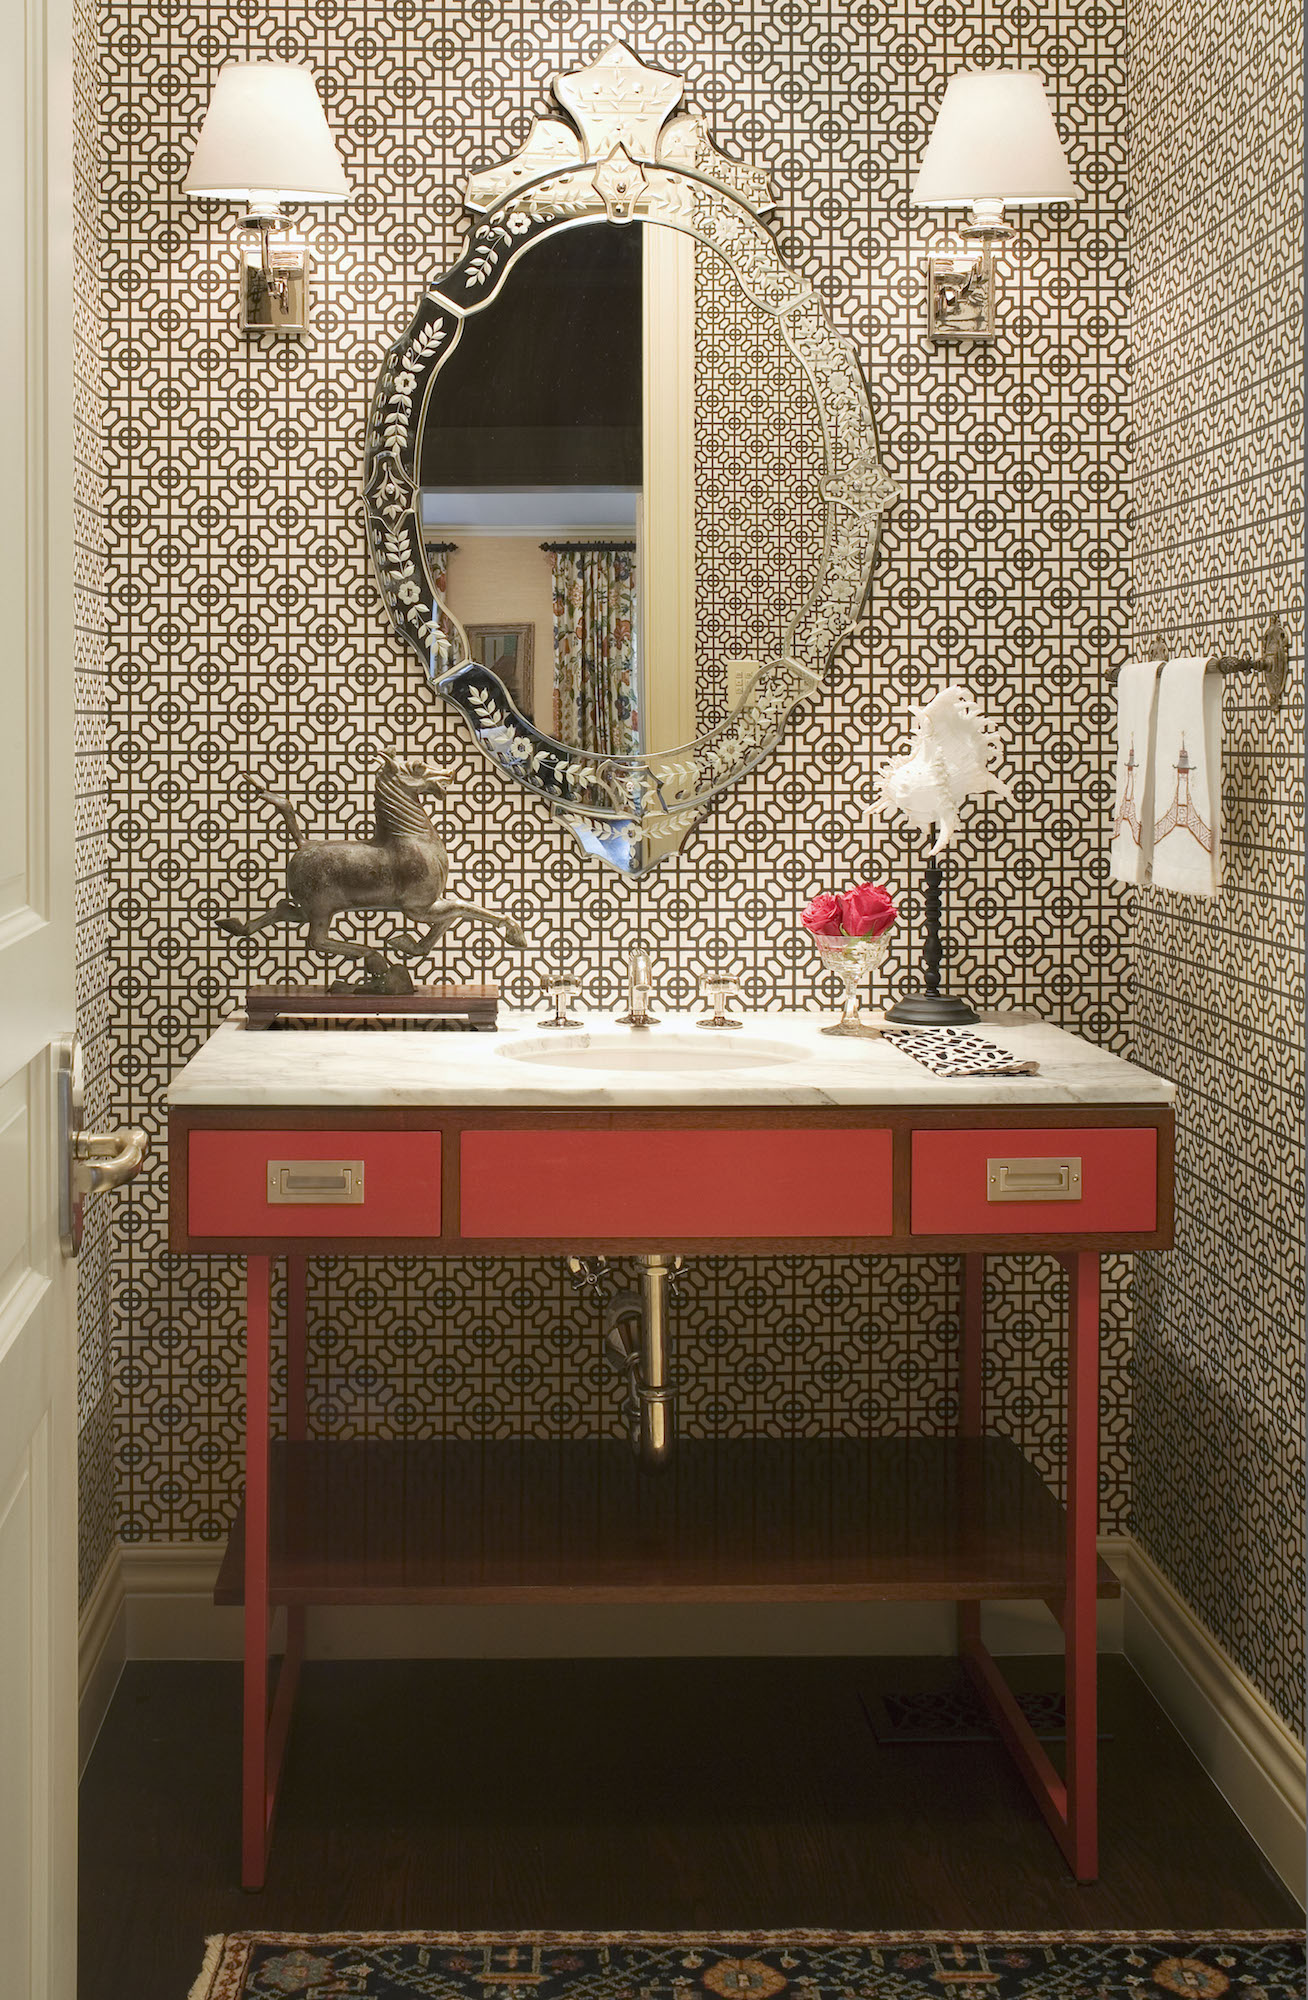 Andrea Schumacher transformed a petite powder room into a statement-making space with a vibrant red vanity from Waterworks and Sussex wallpaper in black and white by Designers Guild. Photo by Emily Minton Redfield